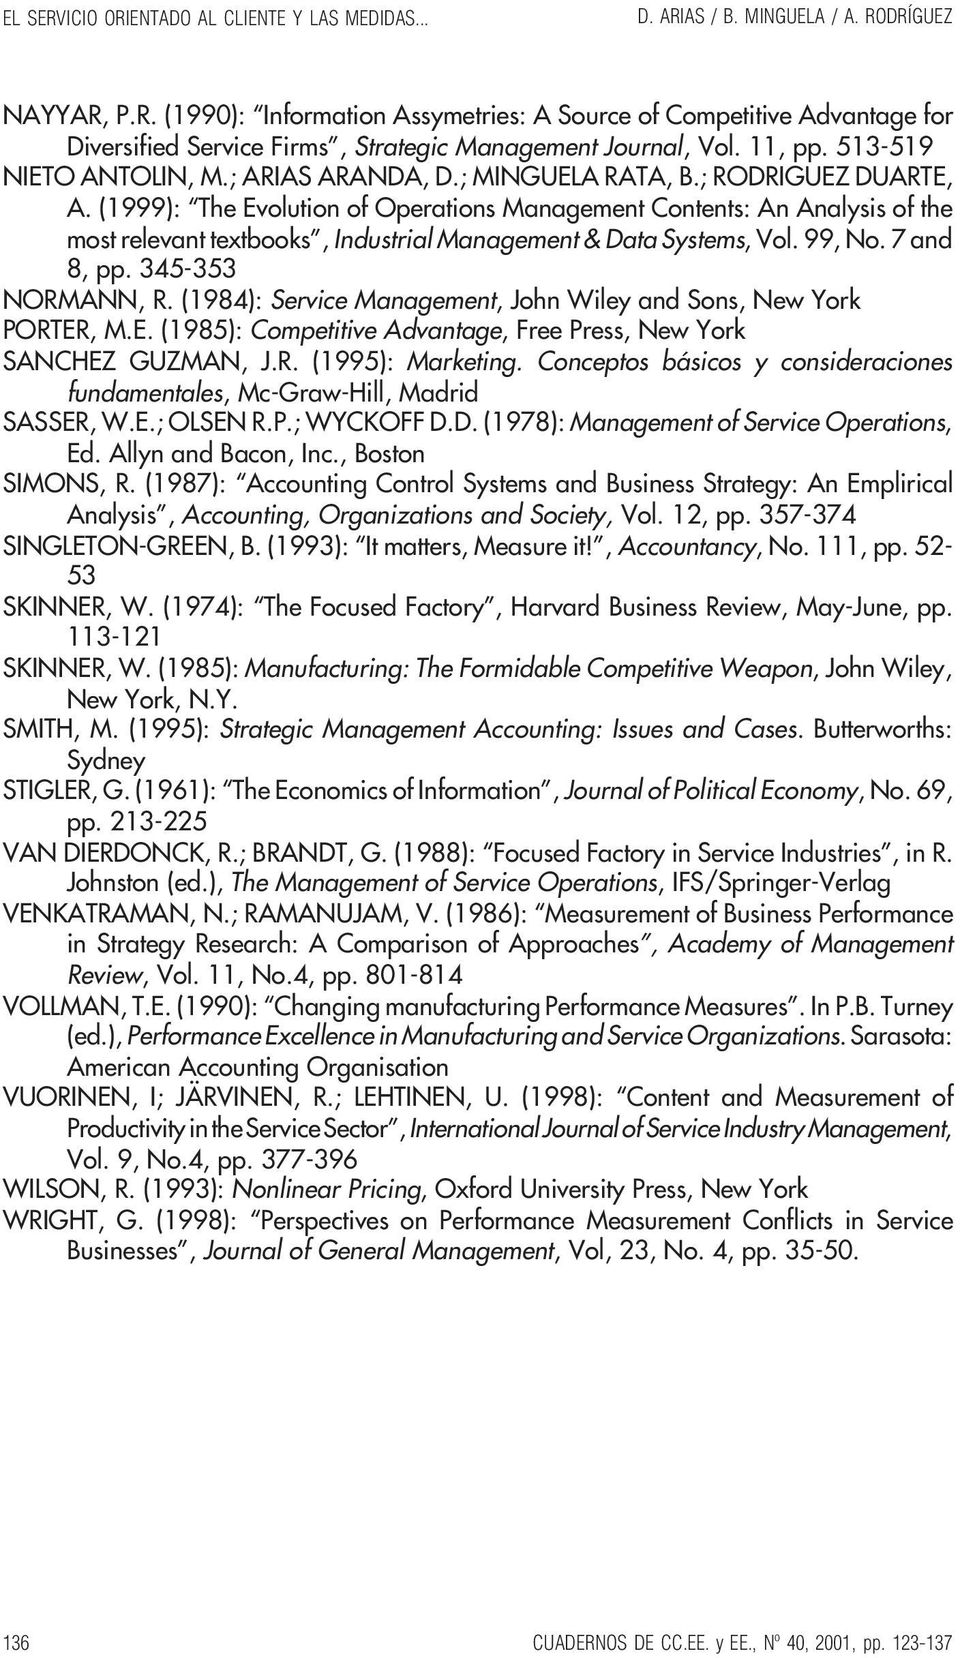 (1999): The Evolution of Operations Management Contents: An Analysis of the most relevant textbooks, Industrial Management & Data Systems, Vol. 99, No. 7 and 8, pp. 345-353 NORMANN, R.